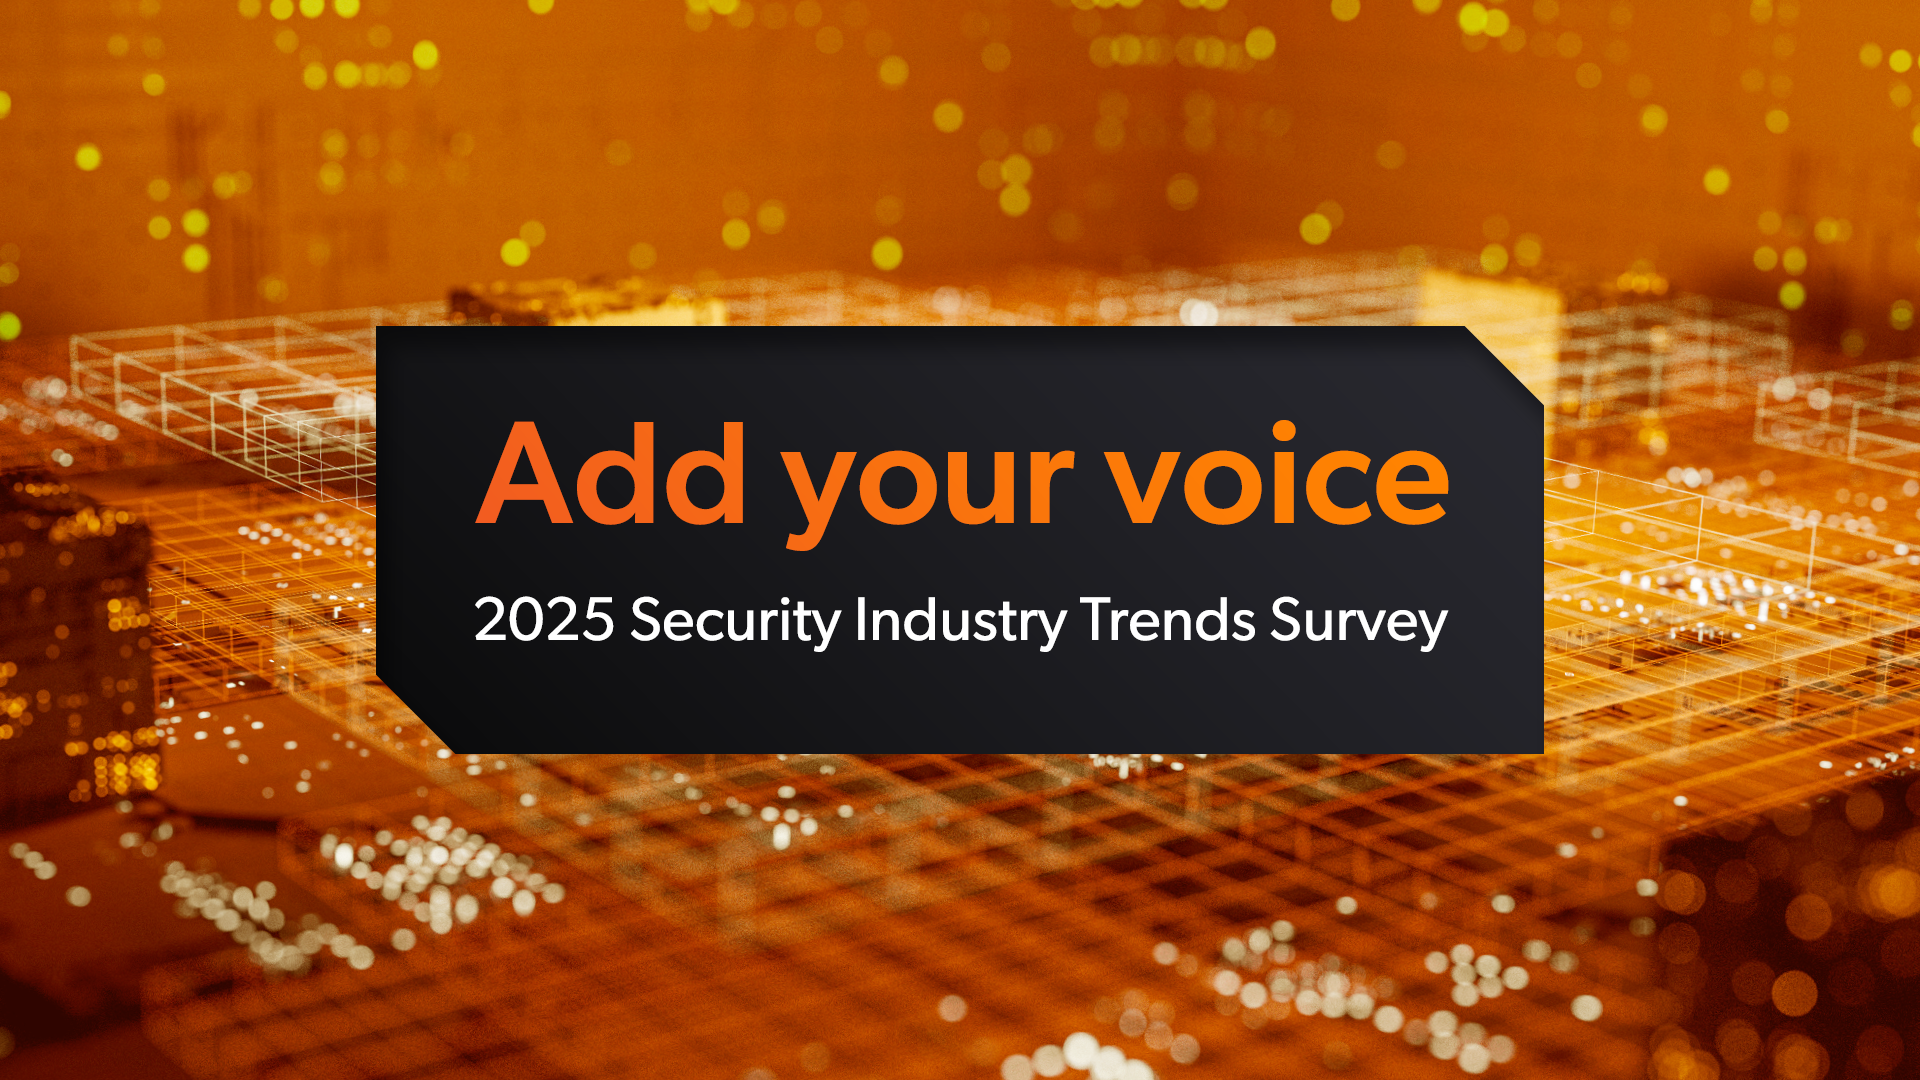 Add your voice - 2025 Security Industry Trends Survey